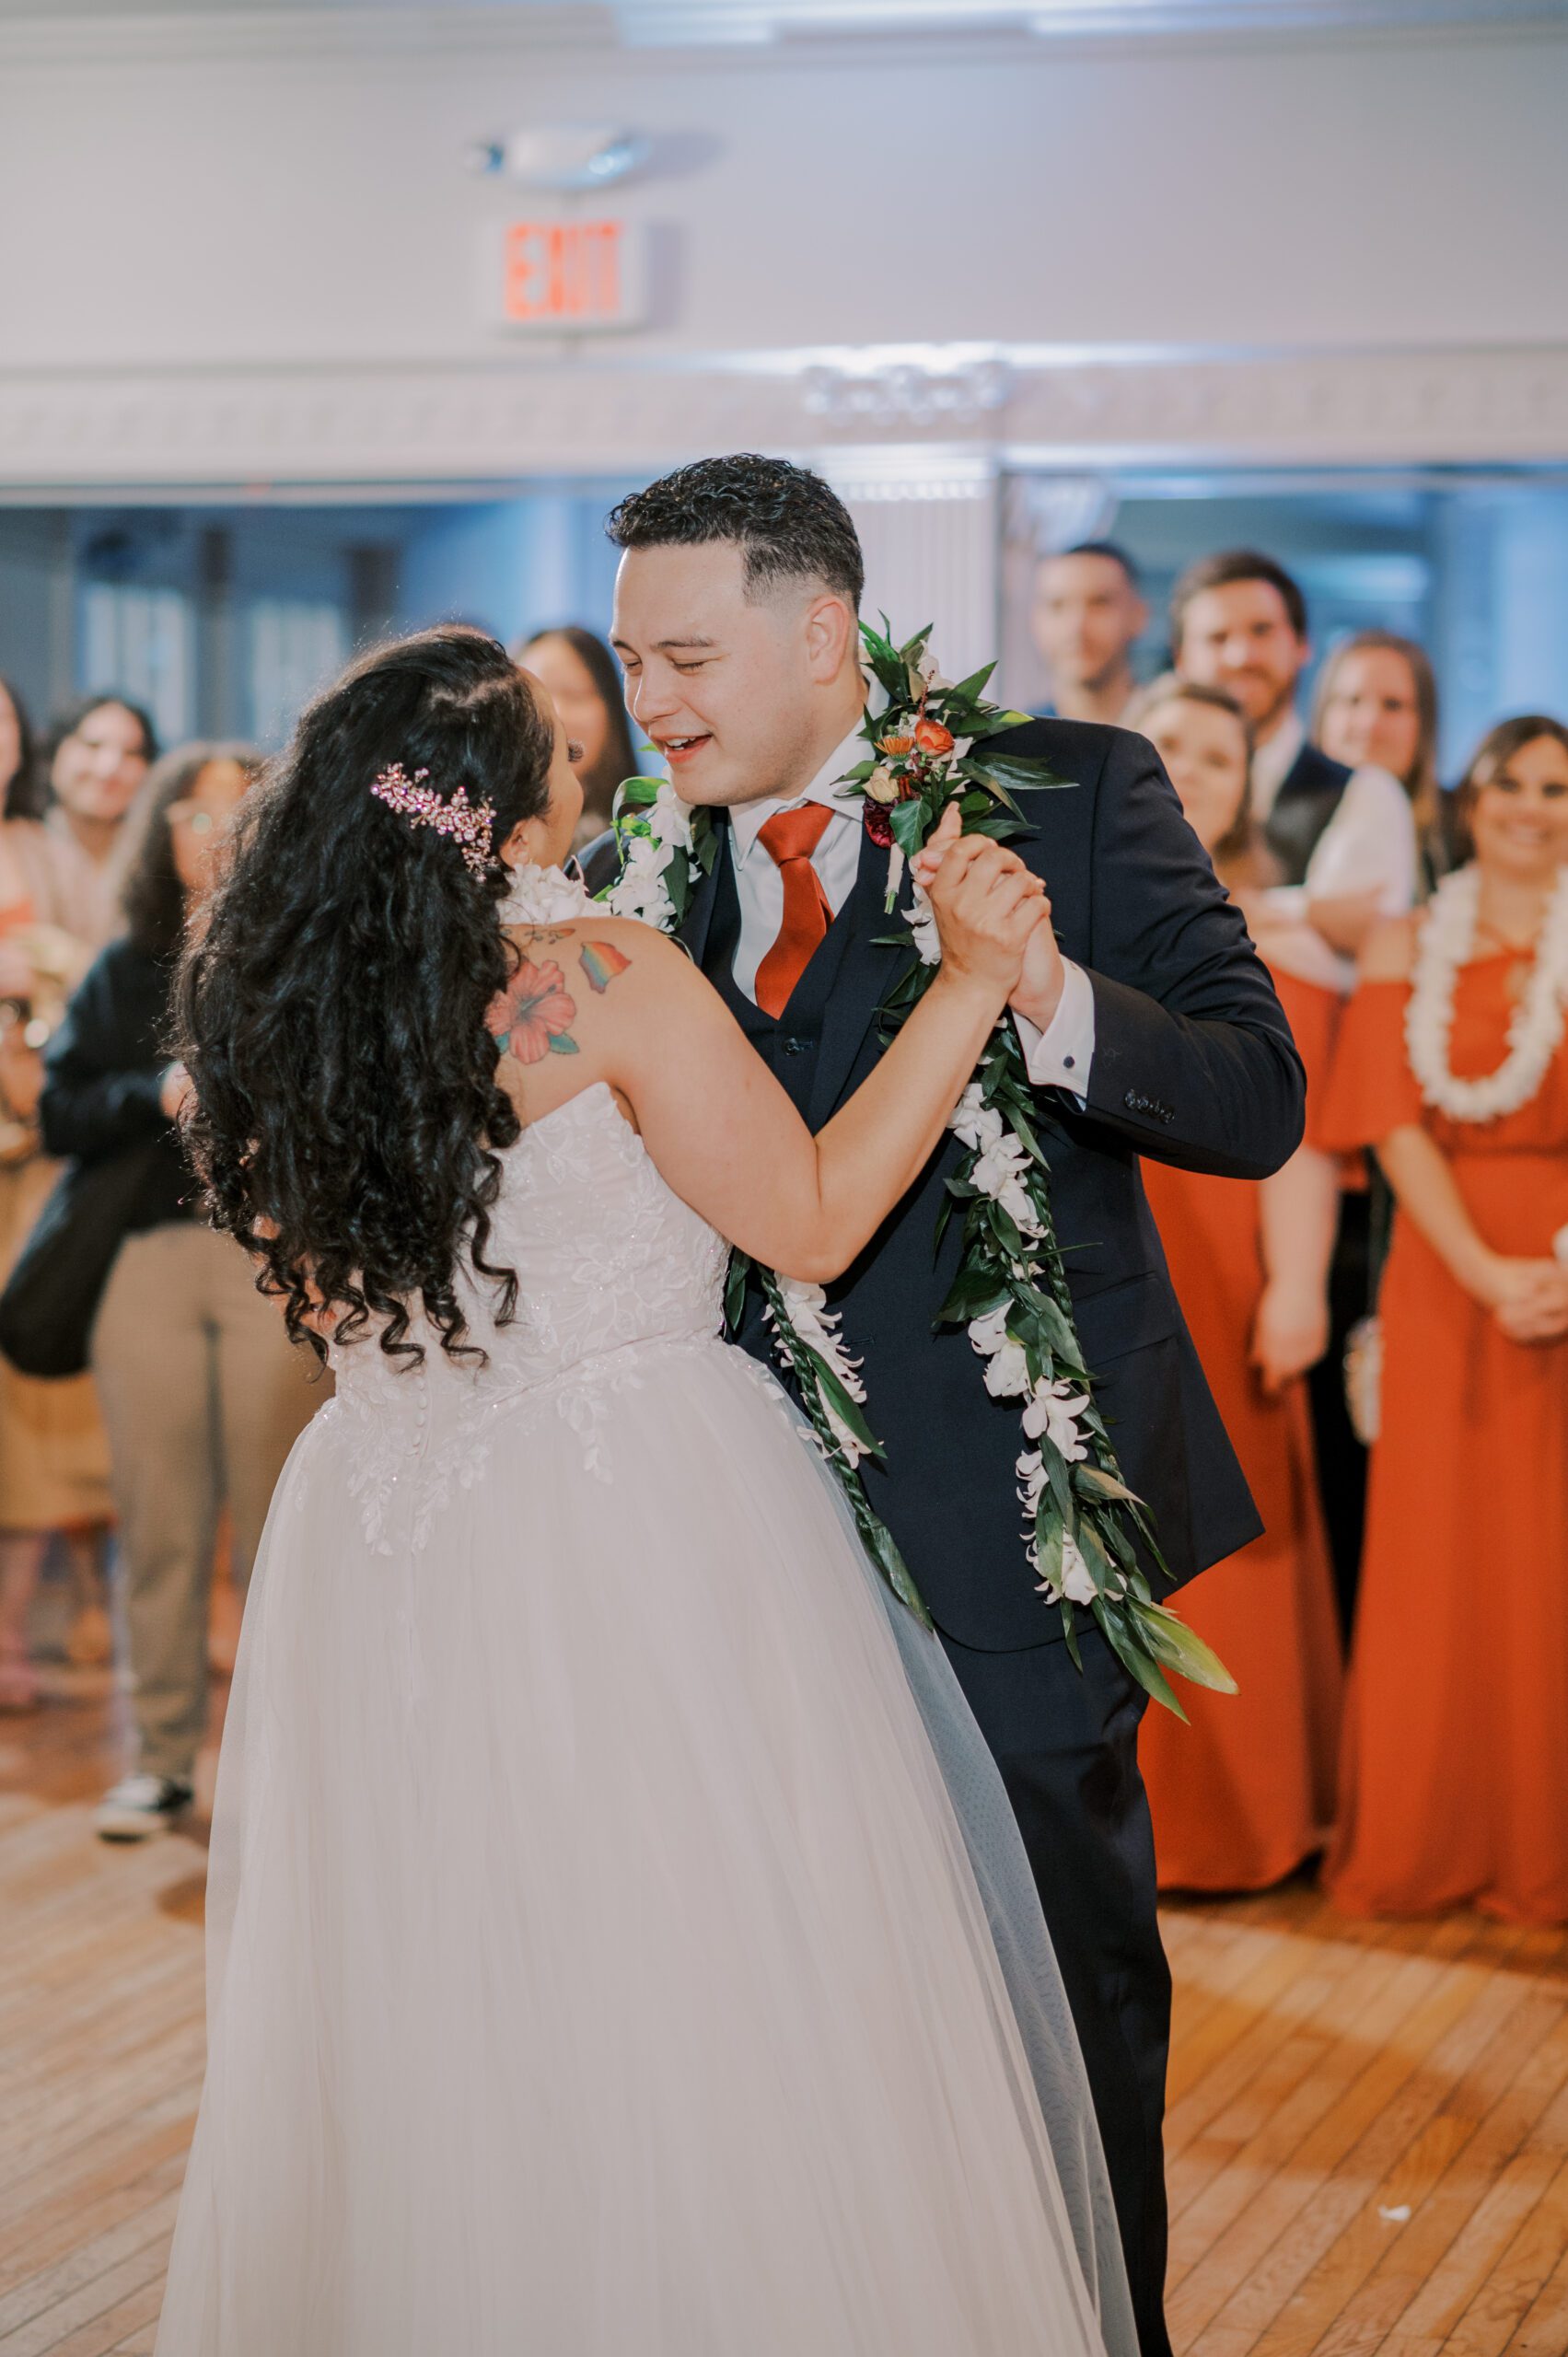 Image of groom dancing with bride, as guests and bridal party watch in background of photo